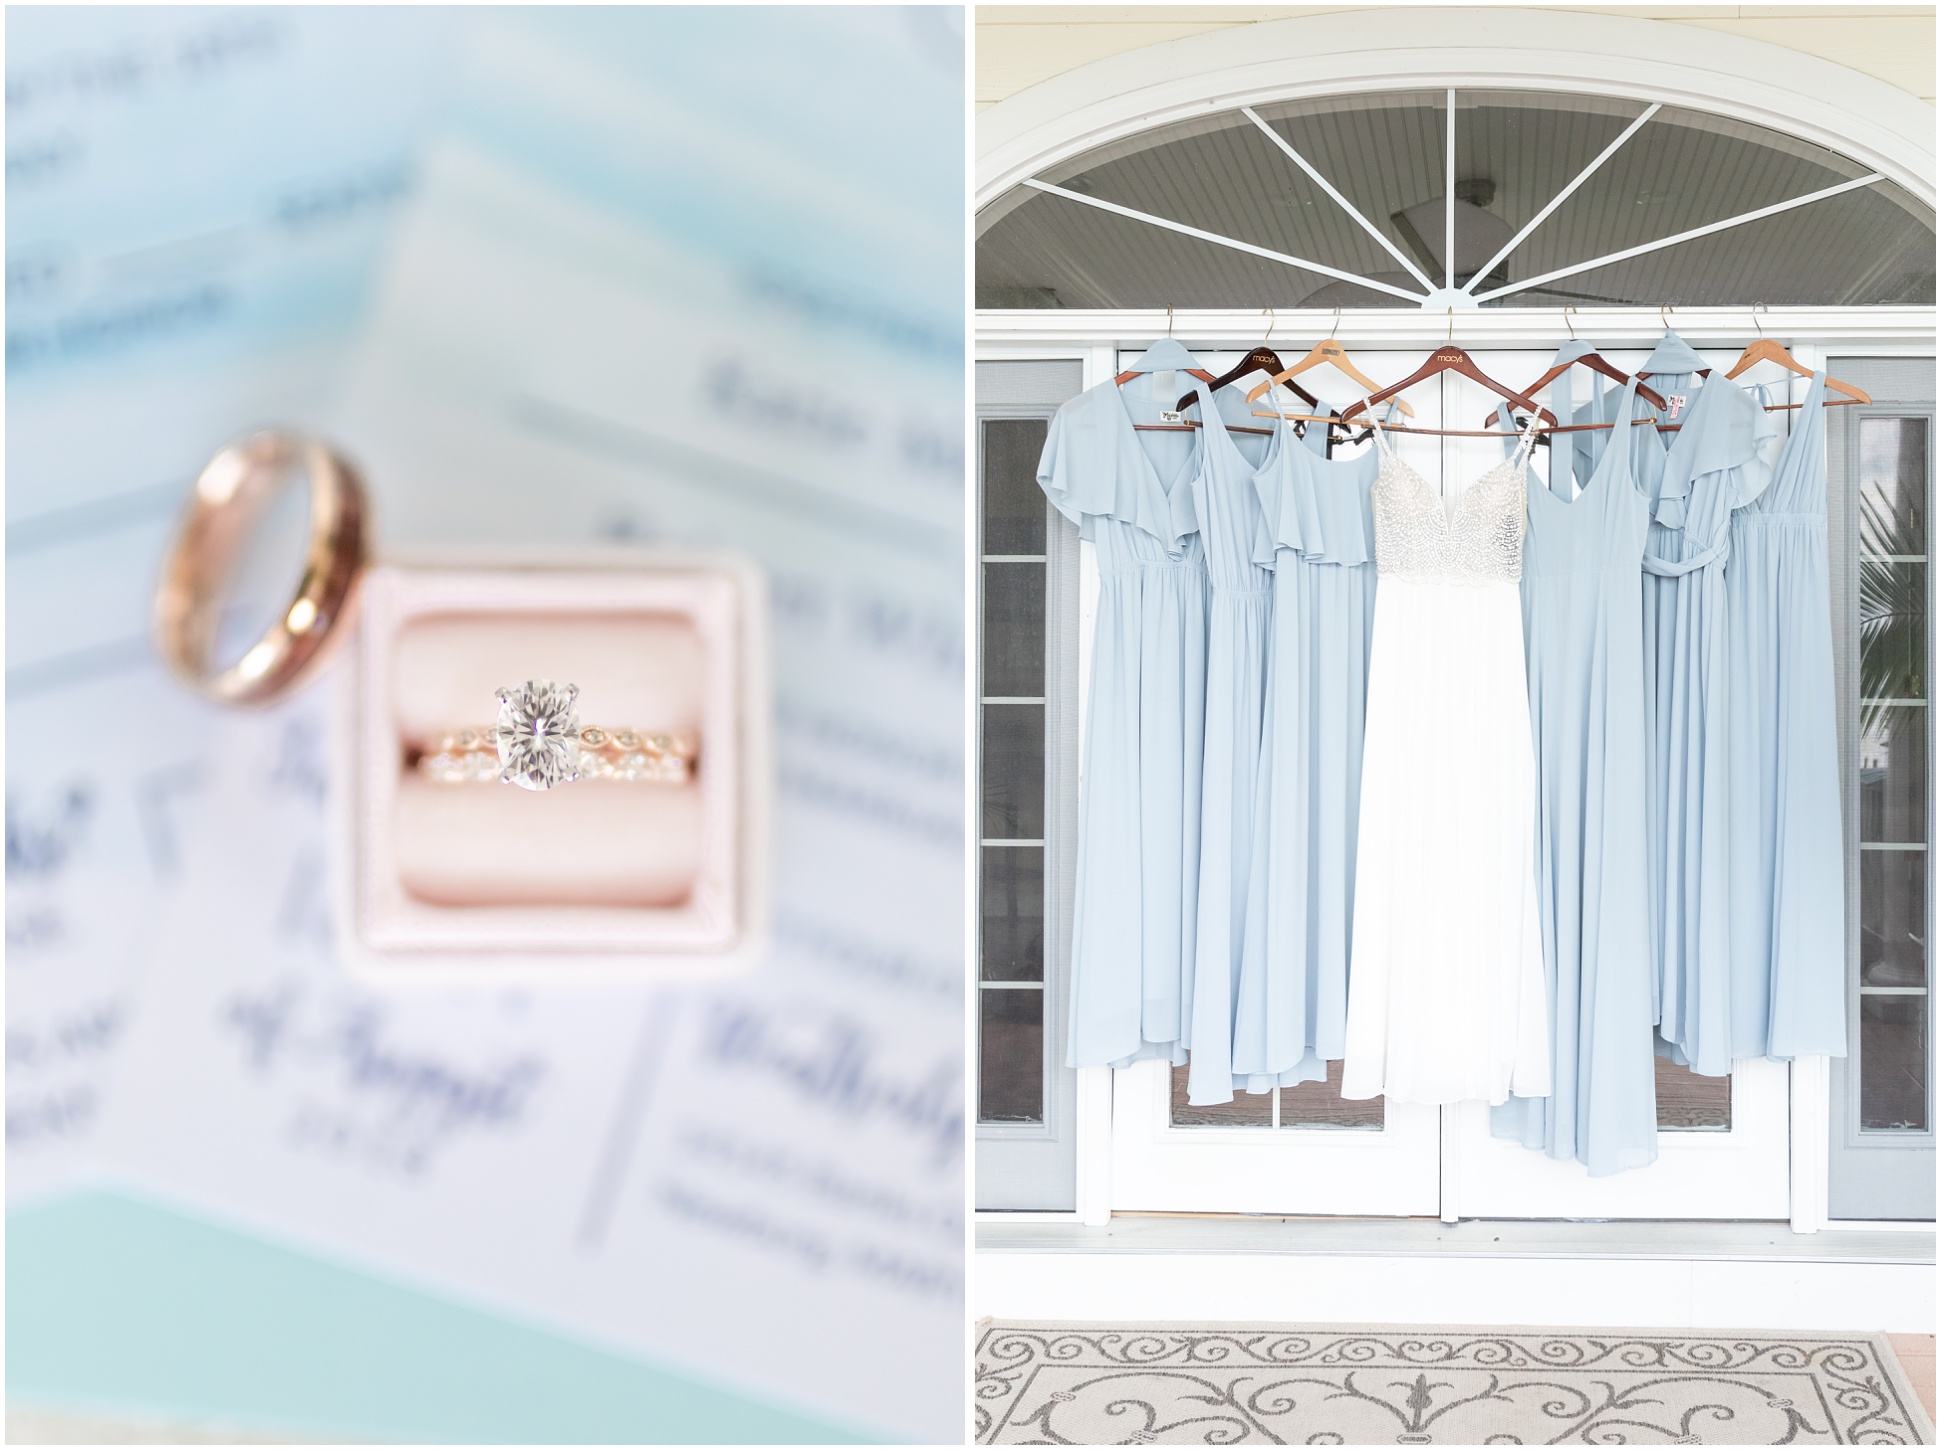 Left Image: Close up shot of the rings on top of the flat lay ; Right Image: Wedding gown with bridesmaids dresses hanging up